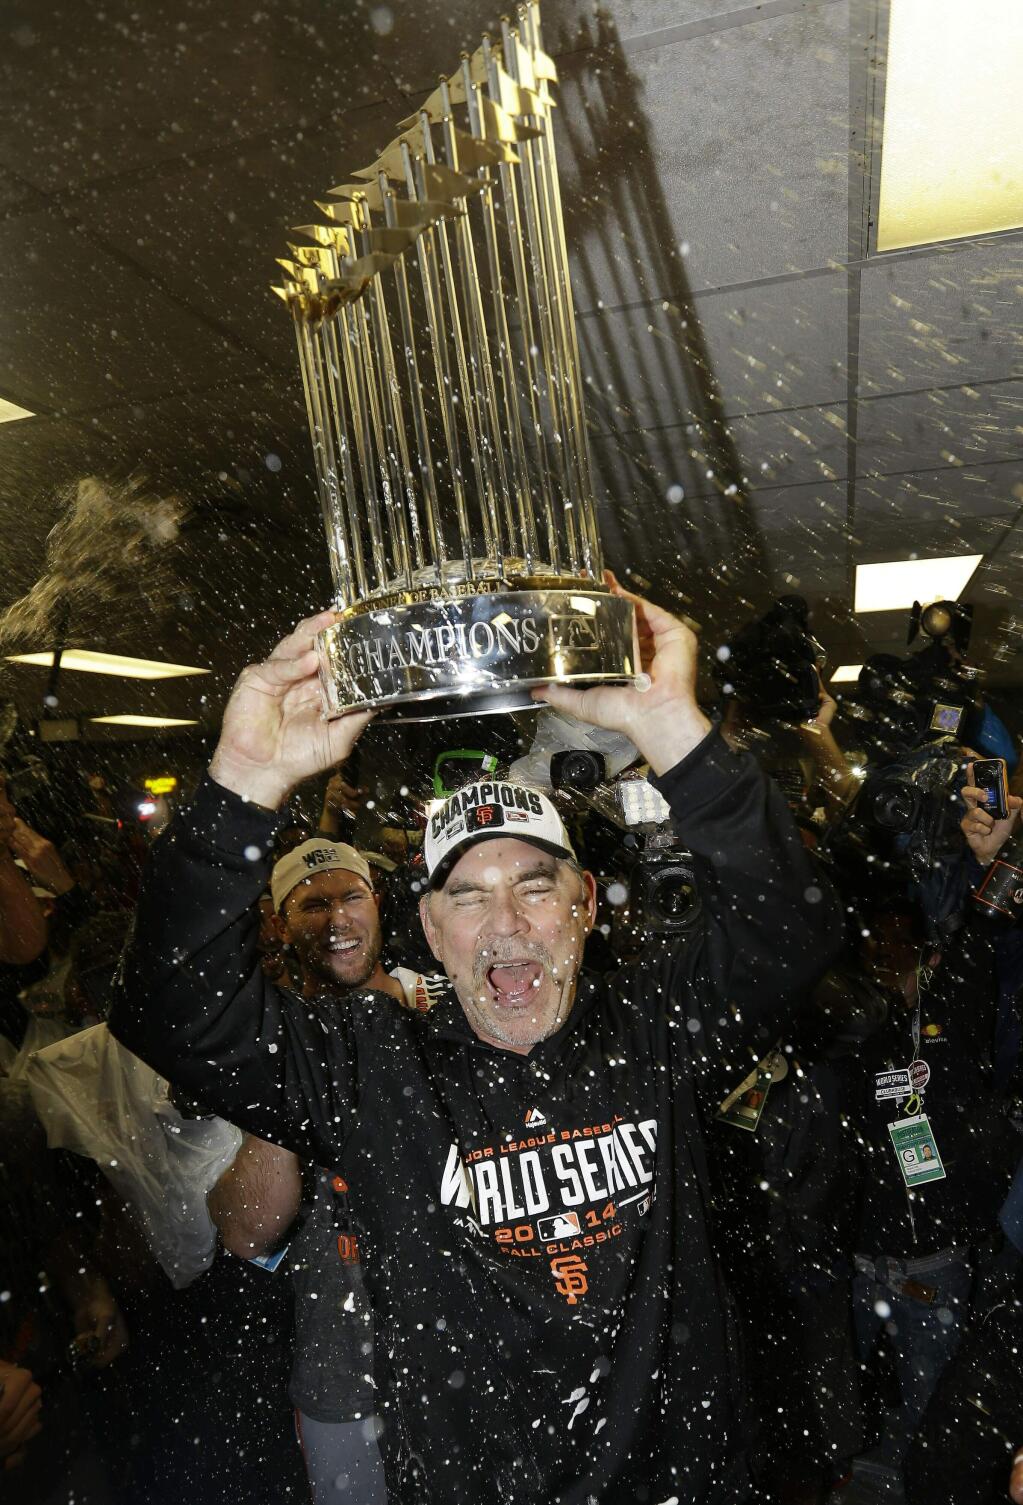 FILE - In this Oct. 29, 2014, file photo, San Francisco Giants manager Bruce Bochy celebrates after Game 7 of baseball's World Series against the Kansas City Royals, in Kansas City, Mo. Bochy says he will retire after this season, his 25th as a big league manager. Bochy says he told the team of his decision on Monday, Feb. 18, 2019. (AP Photo/David J. Phillip, File)